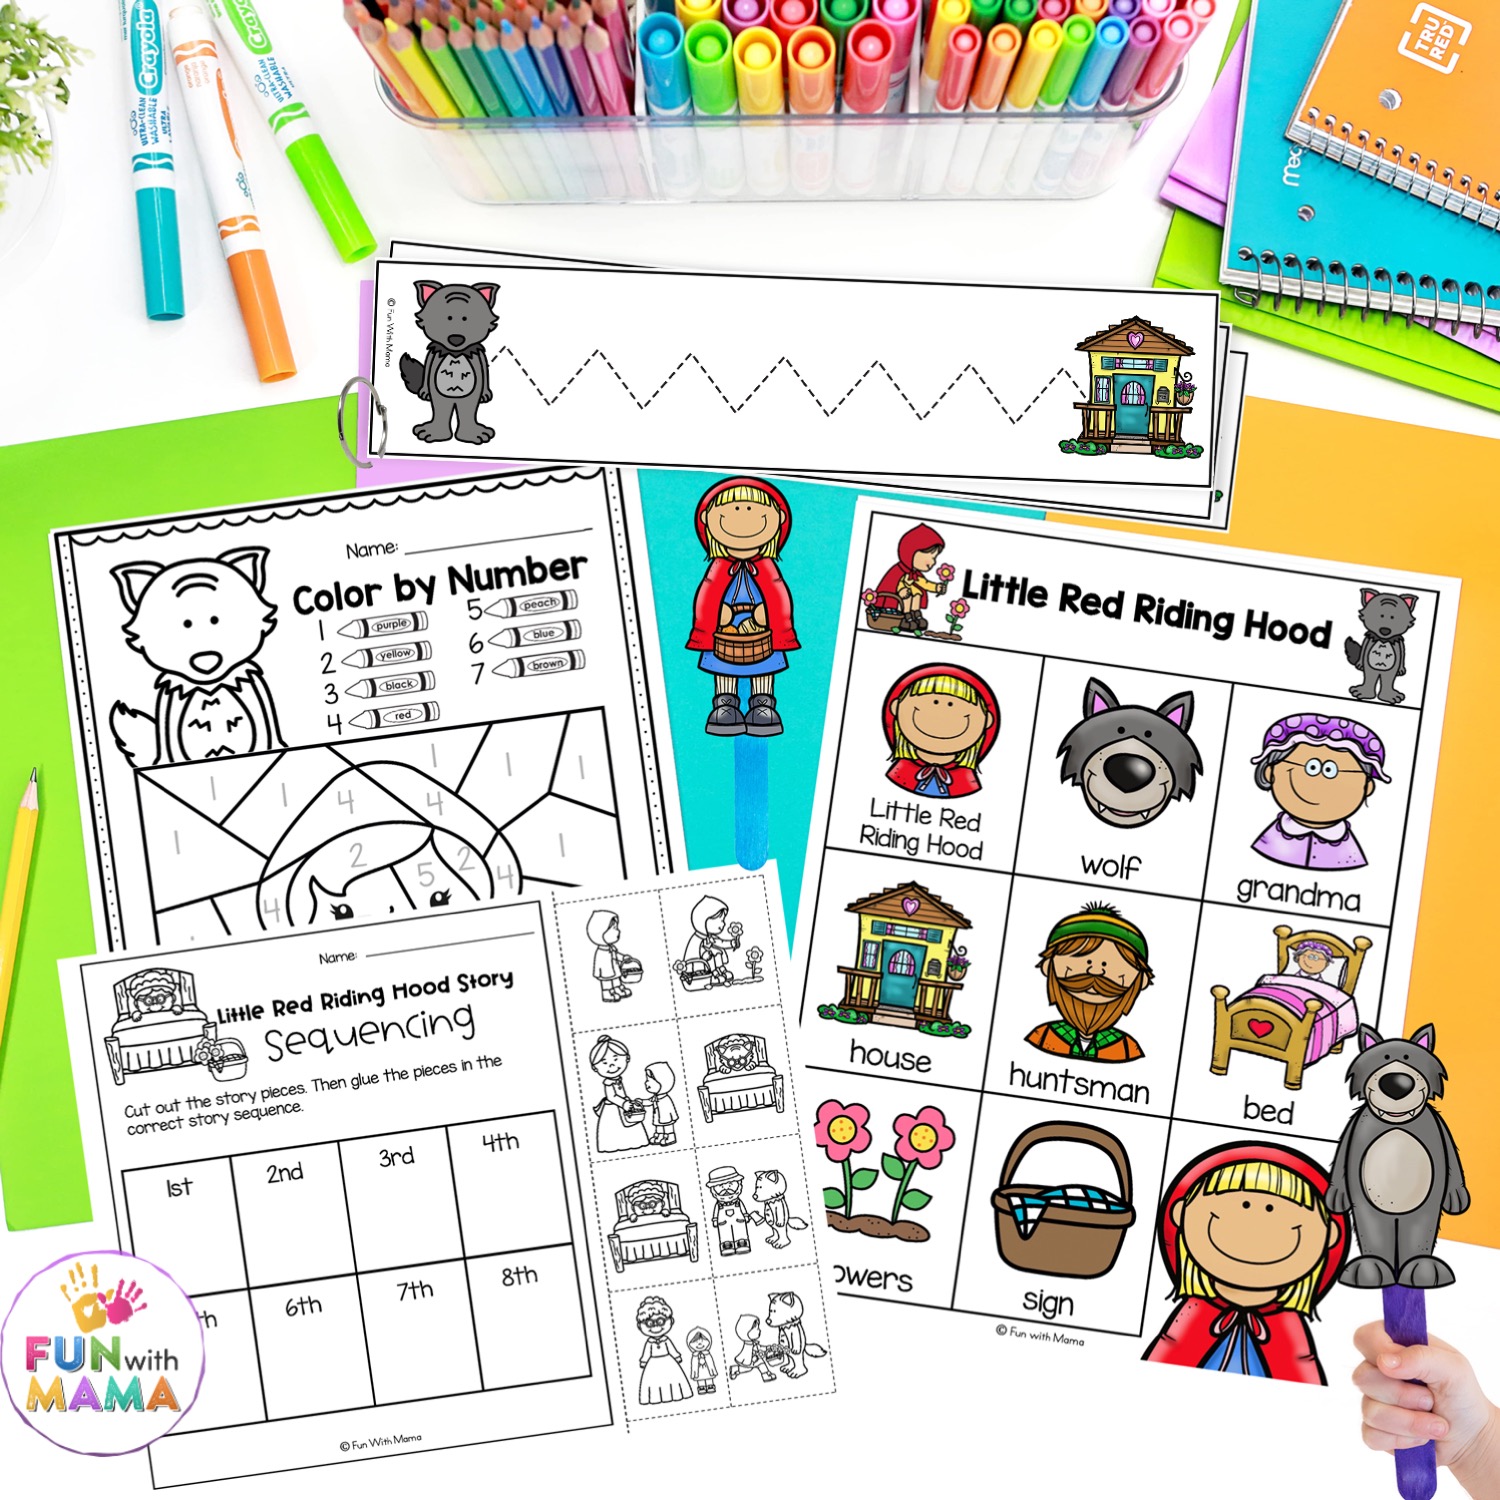 Little red riding hood story activities printables